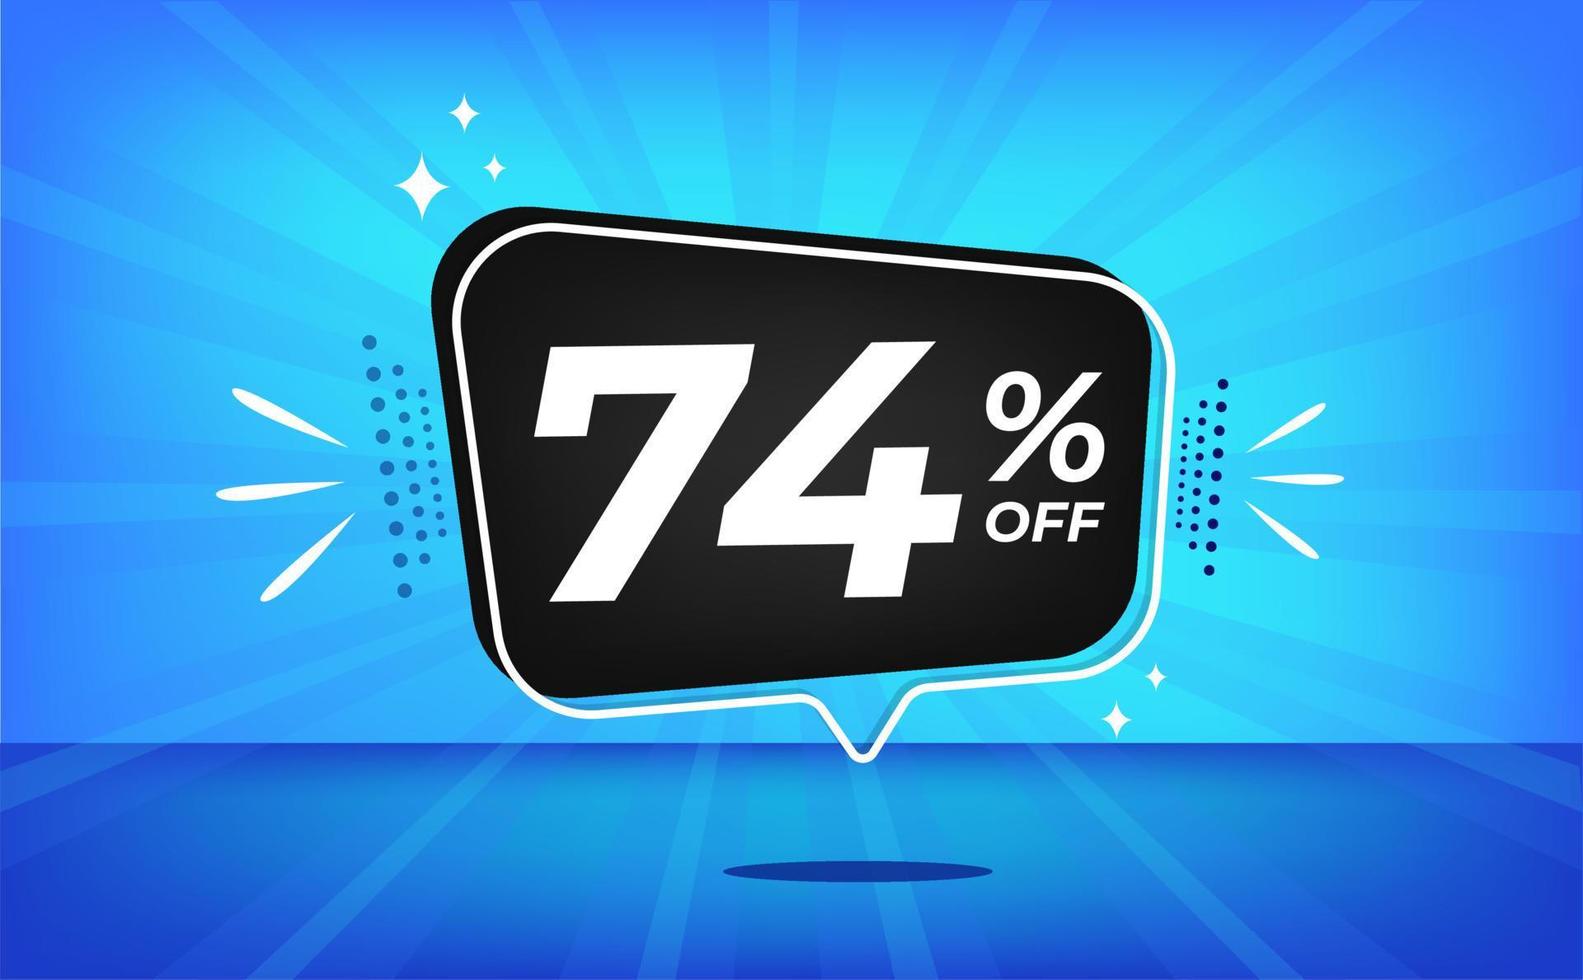 74 percent off. Blue banner with seventy-four percent discount on a black balloon for mega big sales. vector